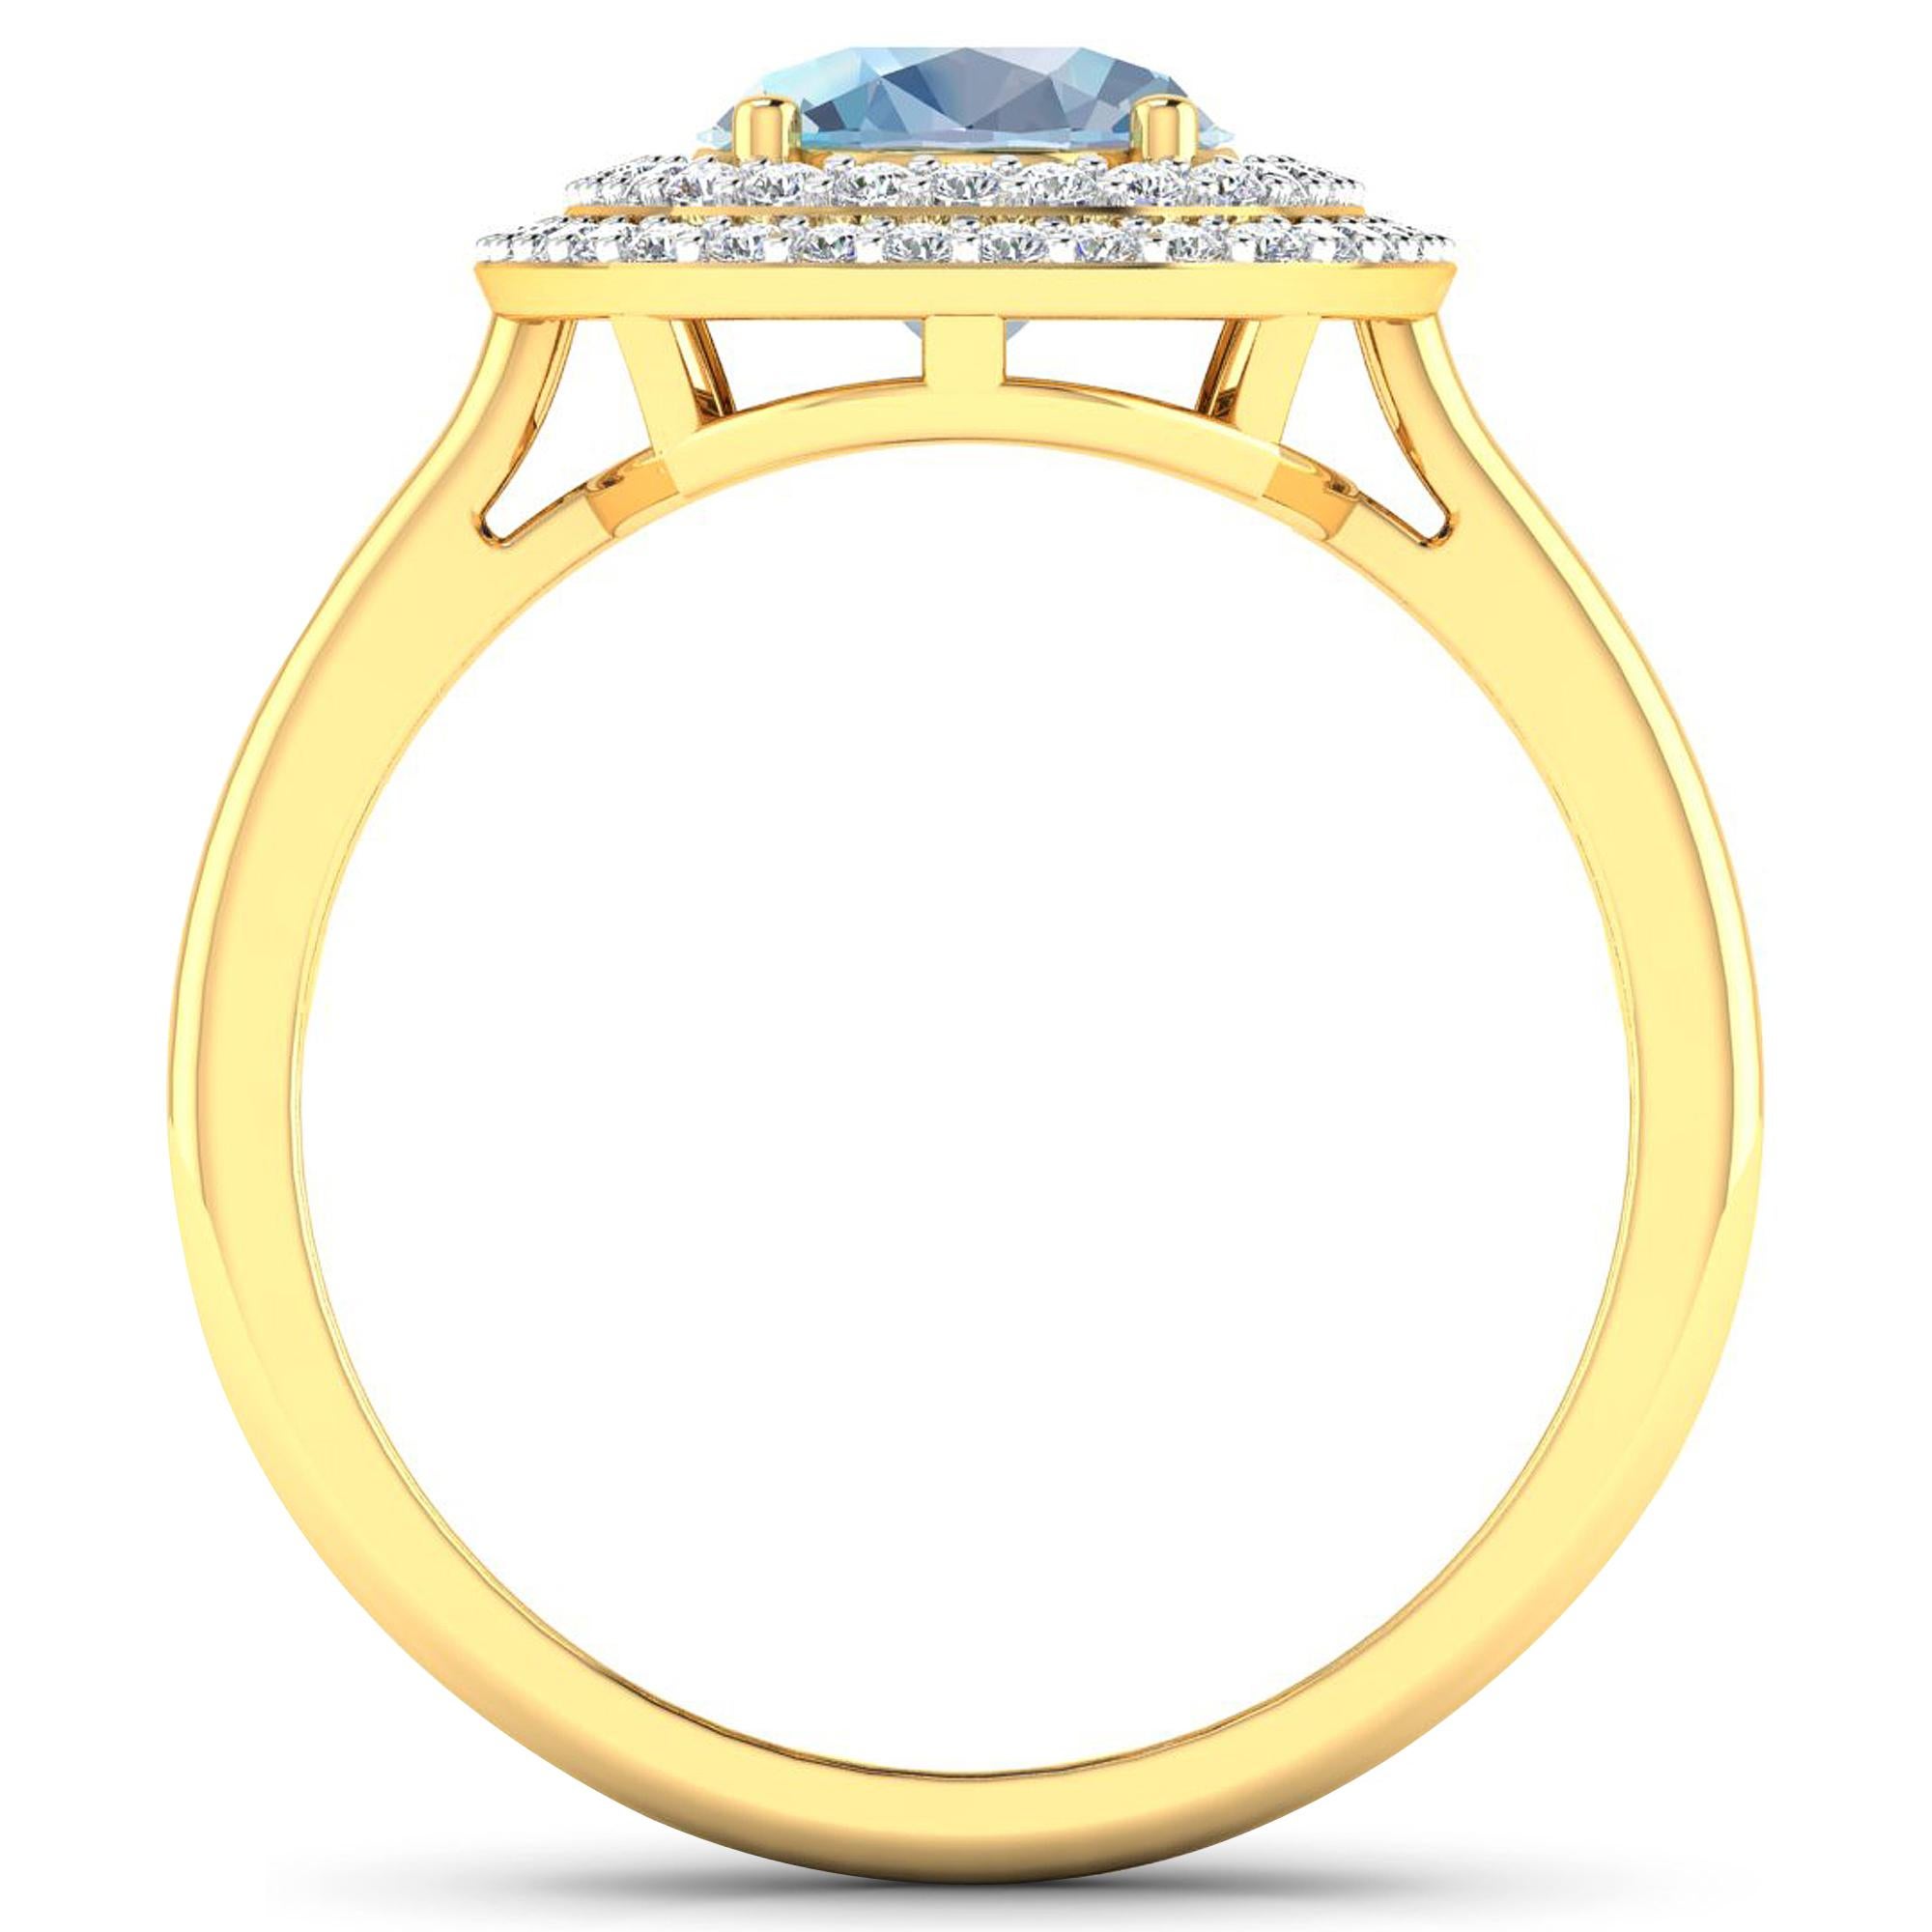 Aquamarine Gold Ring, 14Kt Gold Aquamarine & Diamond Engagement Ring, 1.68ctw.

Flaunt yourself with this 14K Yellow Gold Aquamarine & White Diamond Engagement Ring. The setting is inlaid with 62 accented full-cut White Diamond round stones for a